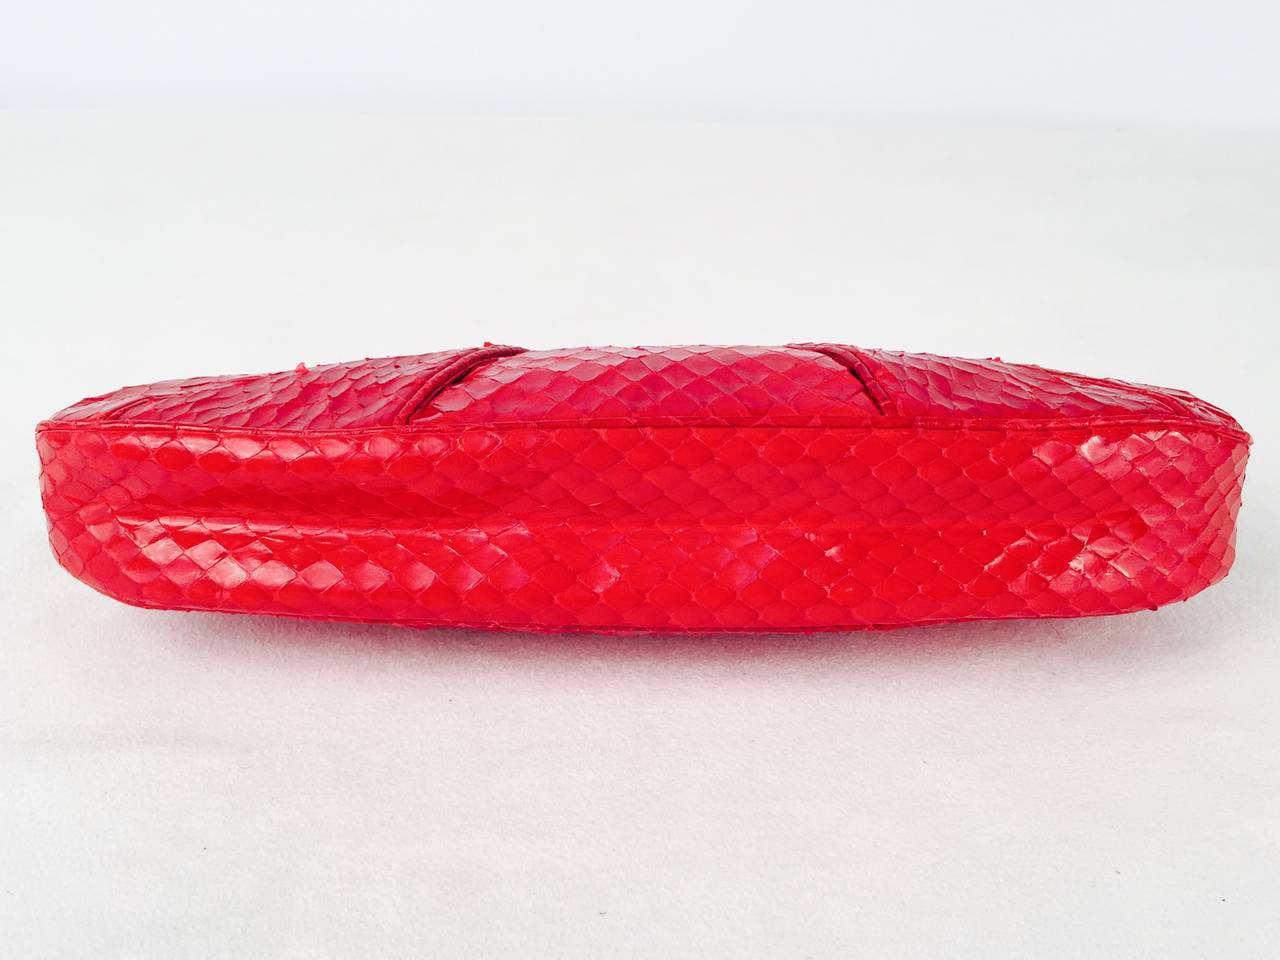 Judith Leiber Red Snakeskin Evening Bag With Jeweled Clasp In Excellent Condition For Sale In Palm Beach, FL